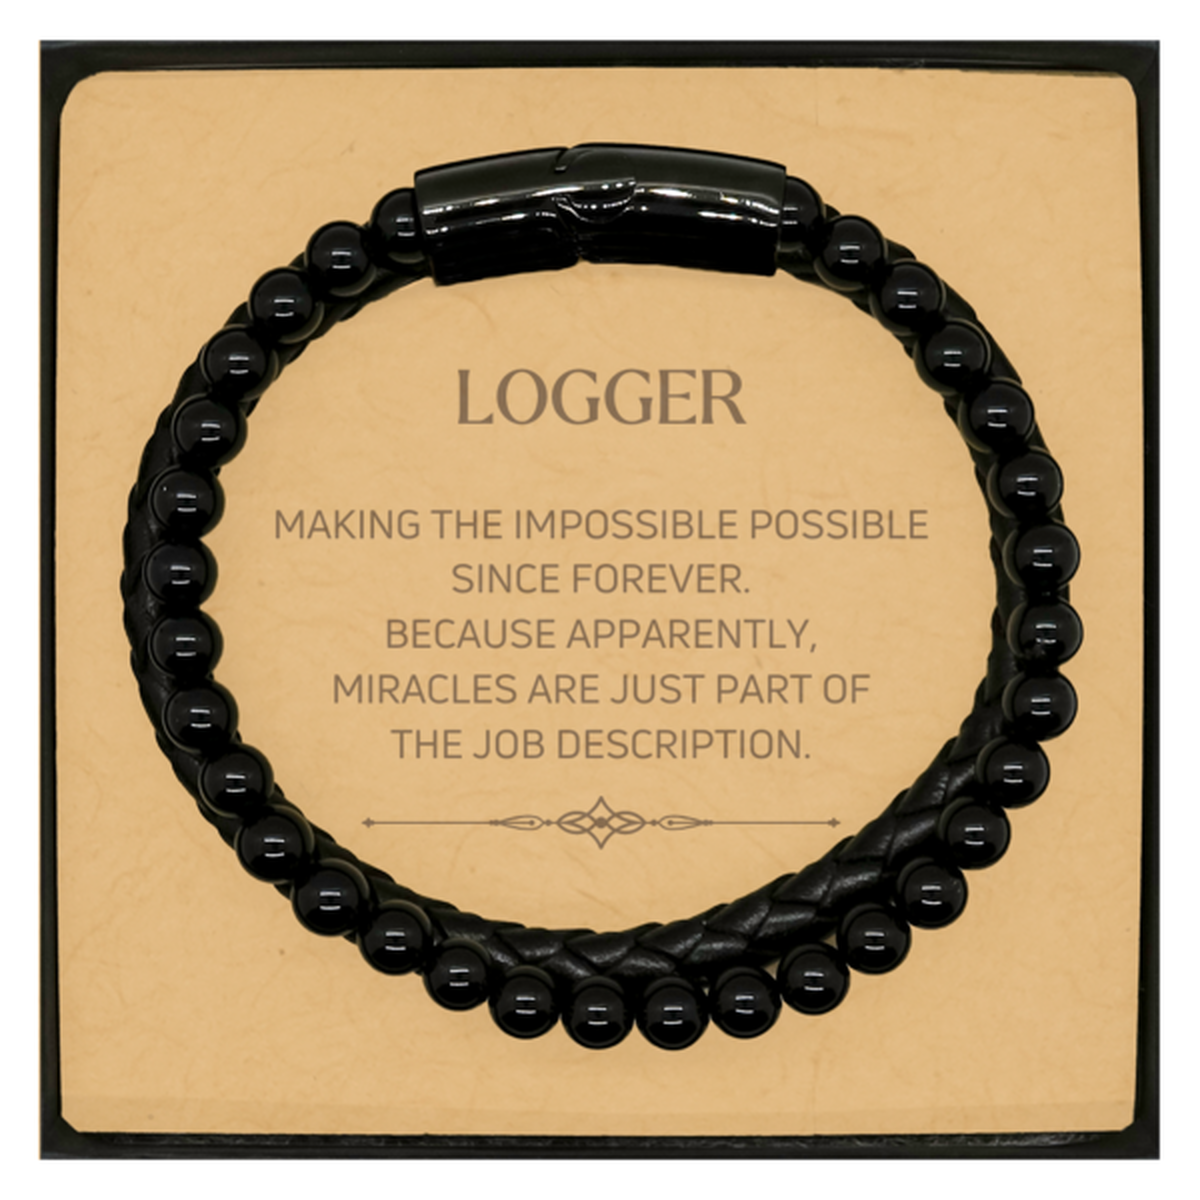 Funny Logger Gifts, Miracles are just part of the job description, Inspirational Birthday Christmas Stone Leather Bracelets For Logger, Men, Women, Coworkers, Friends, Boss